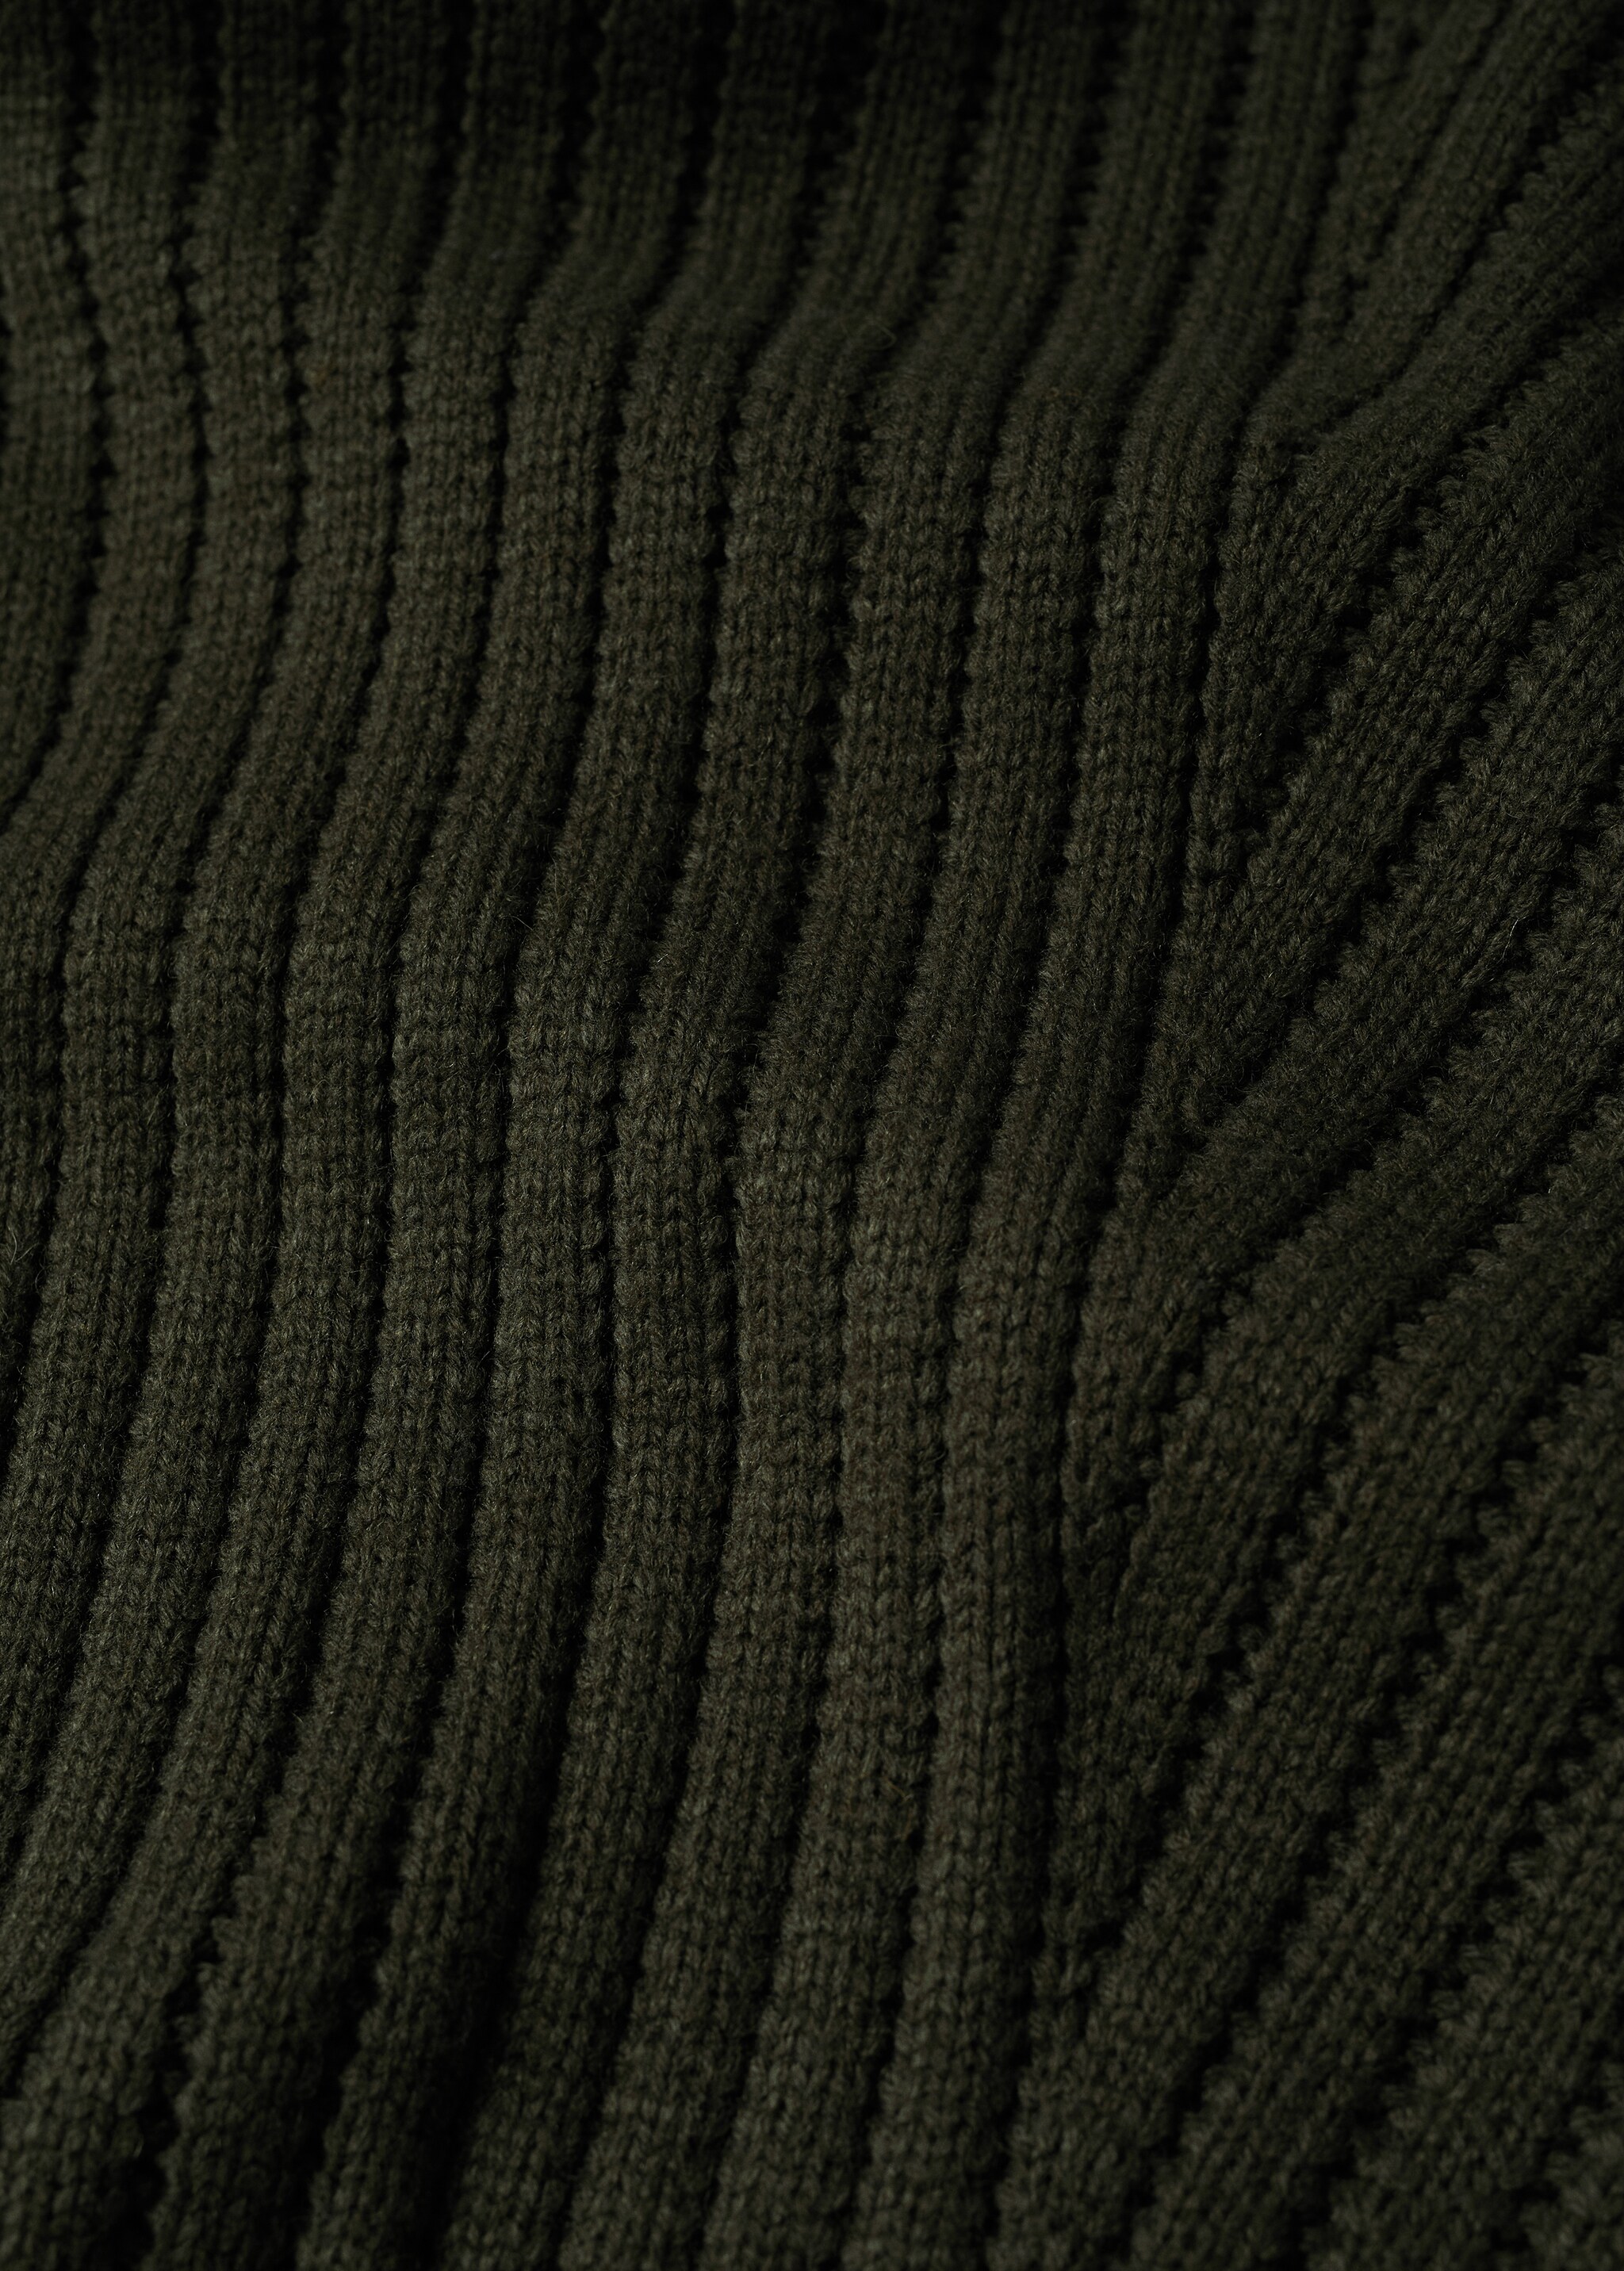 Turtleneck ribbed sweater - Details of the article 8